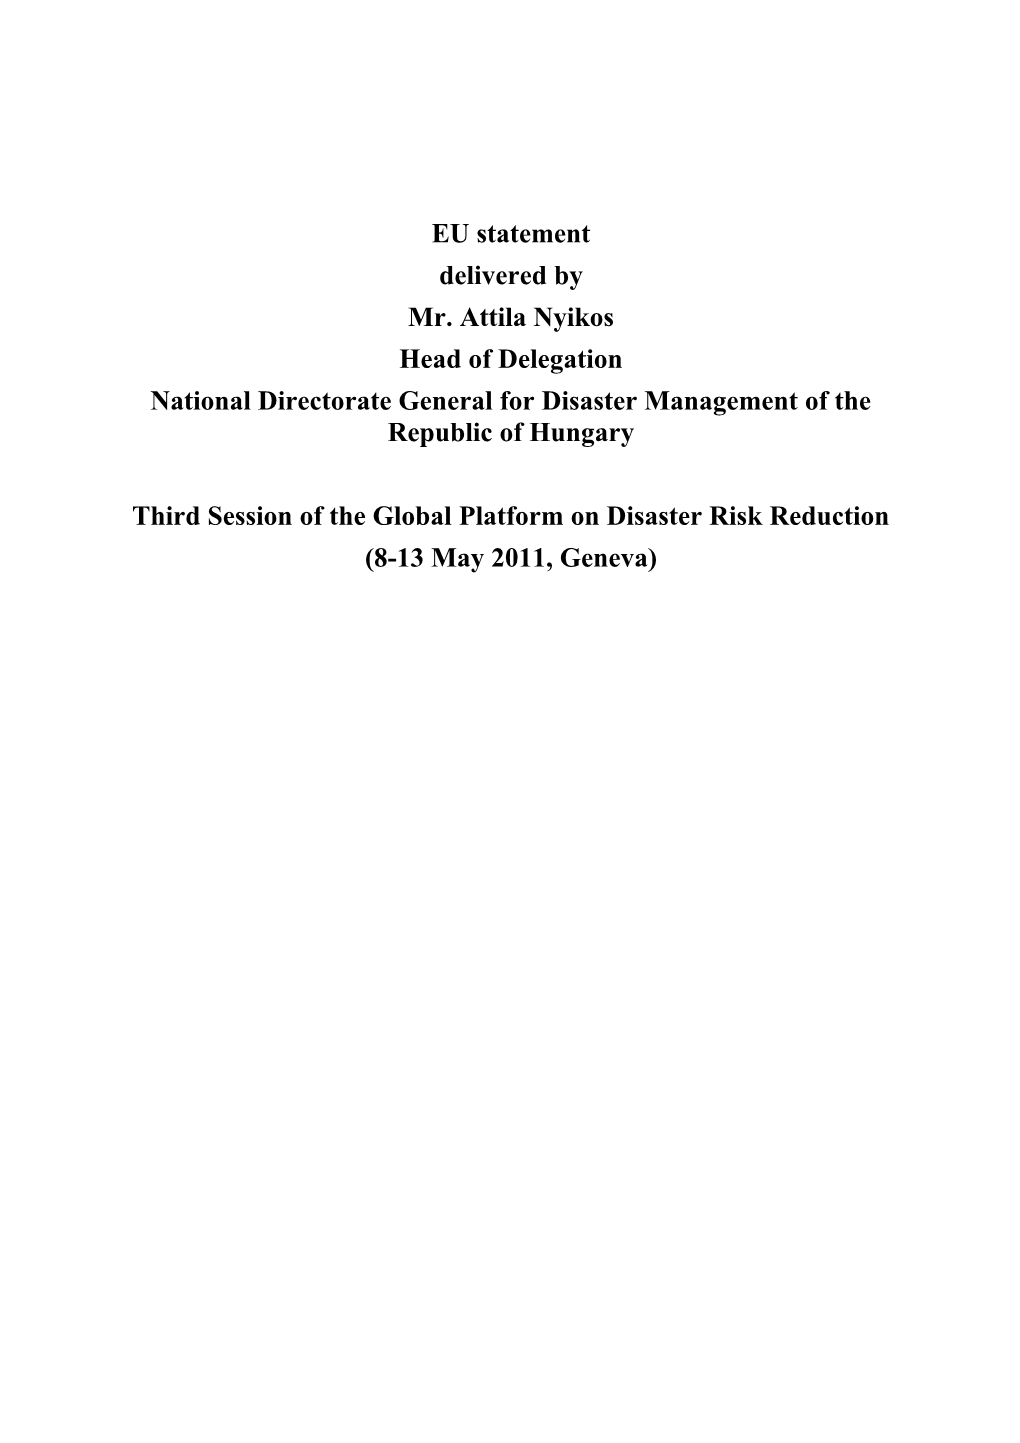 National Directorate General for Disaster Management of the Republic of Hungary